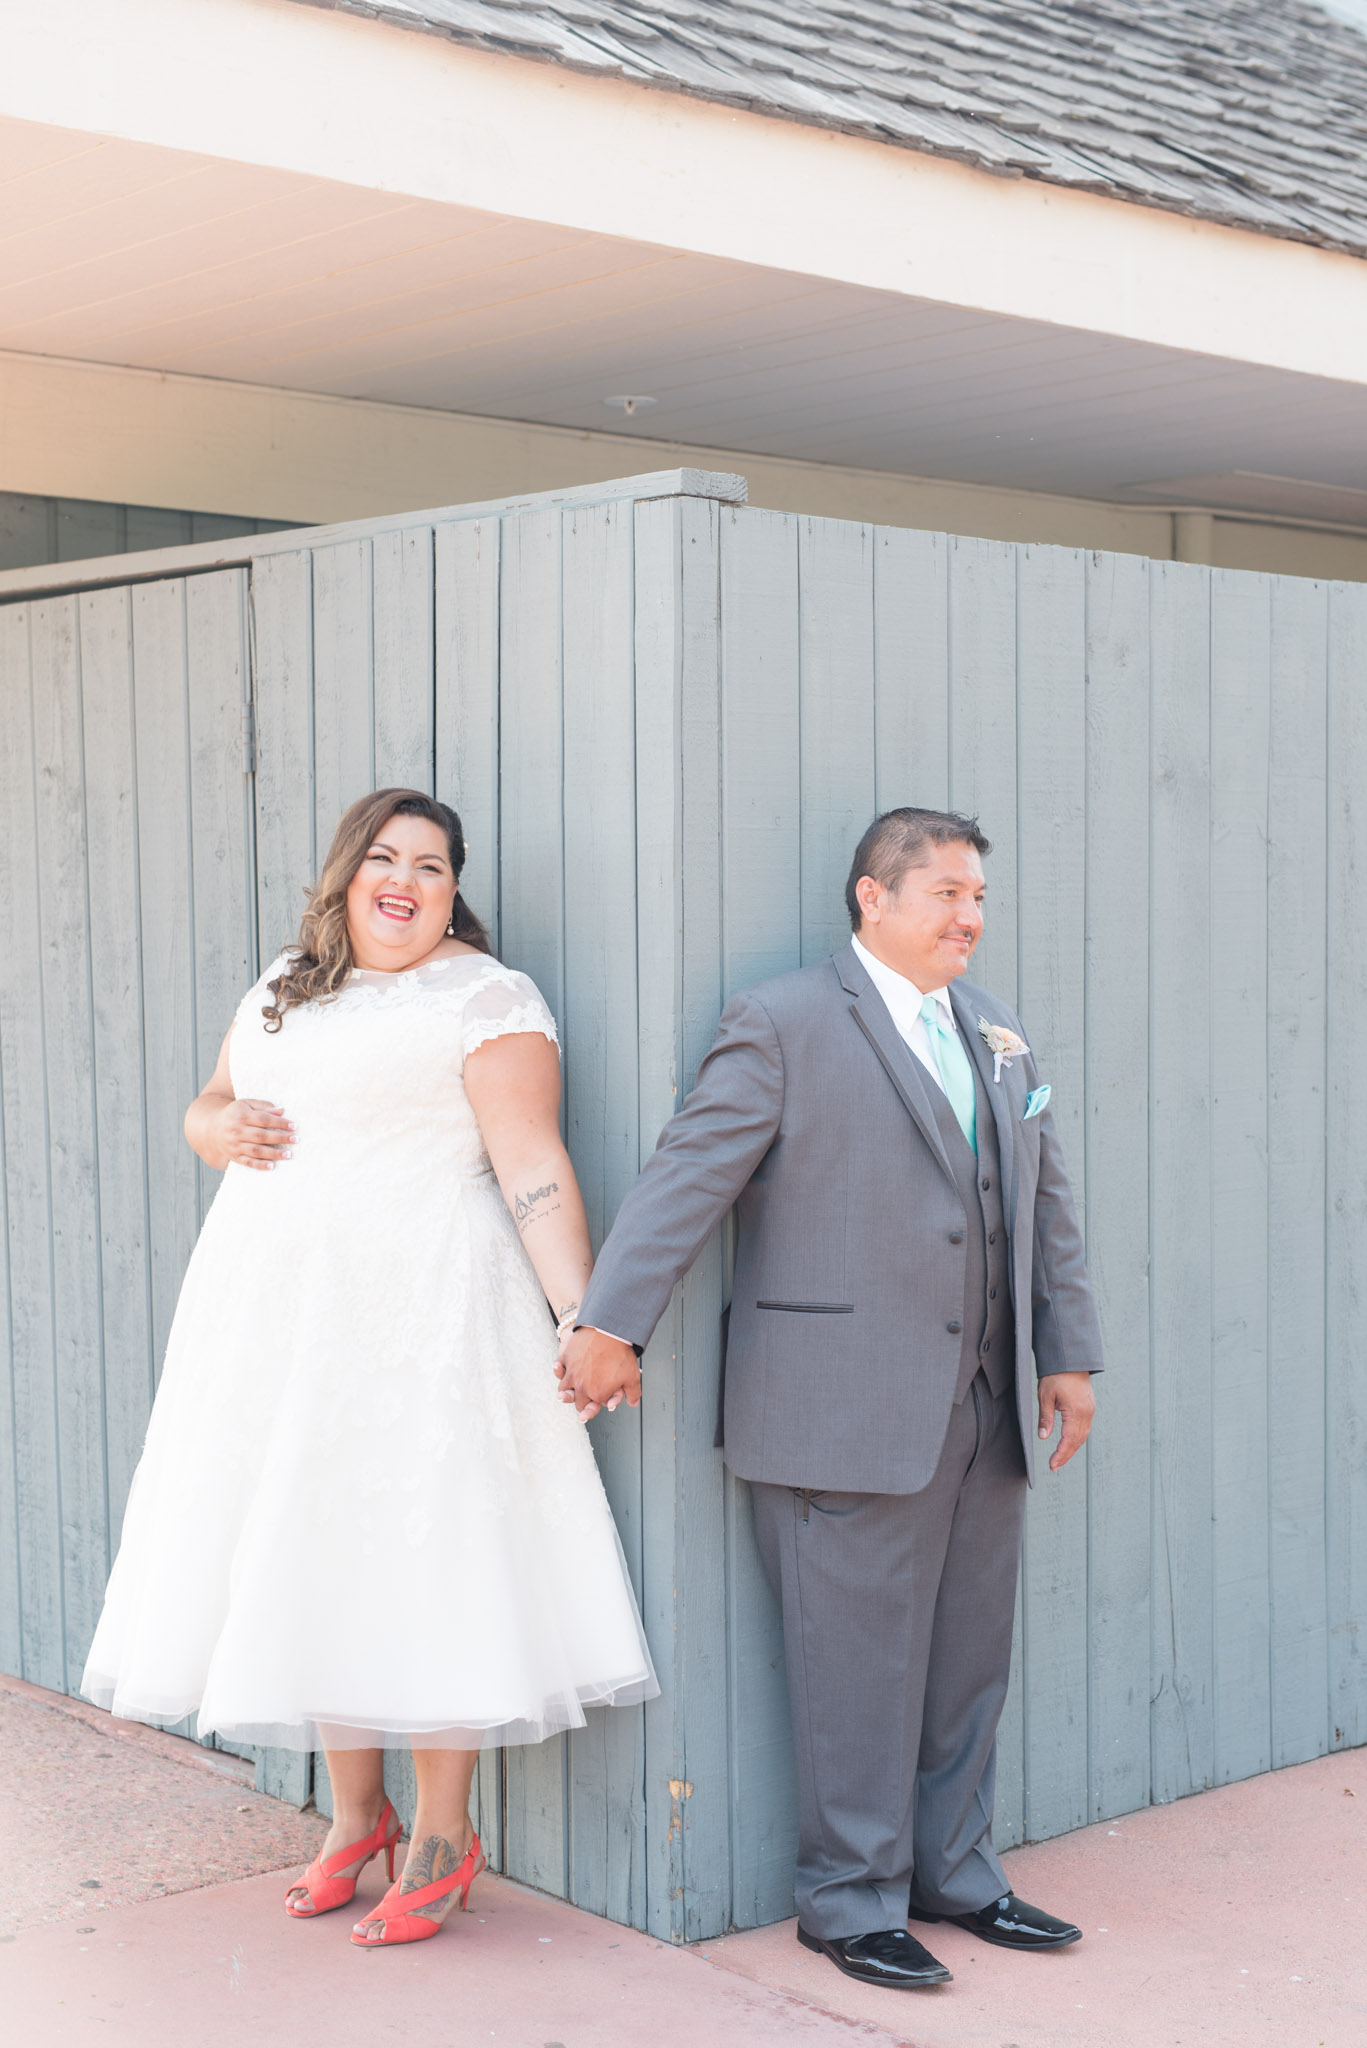 Bride and groom smile as they hold hands around the corner.